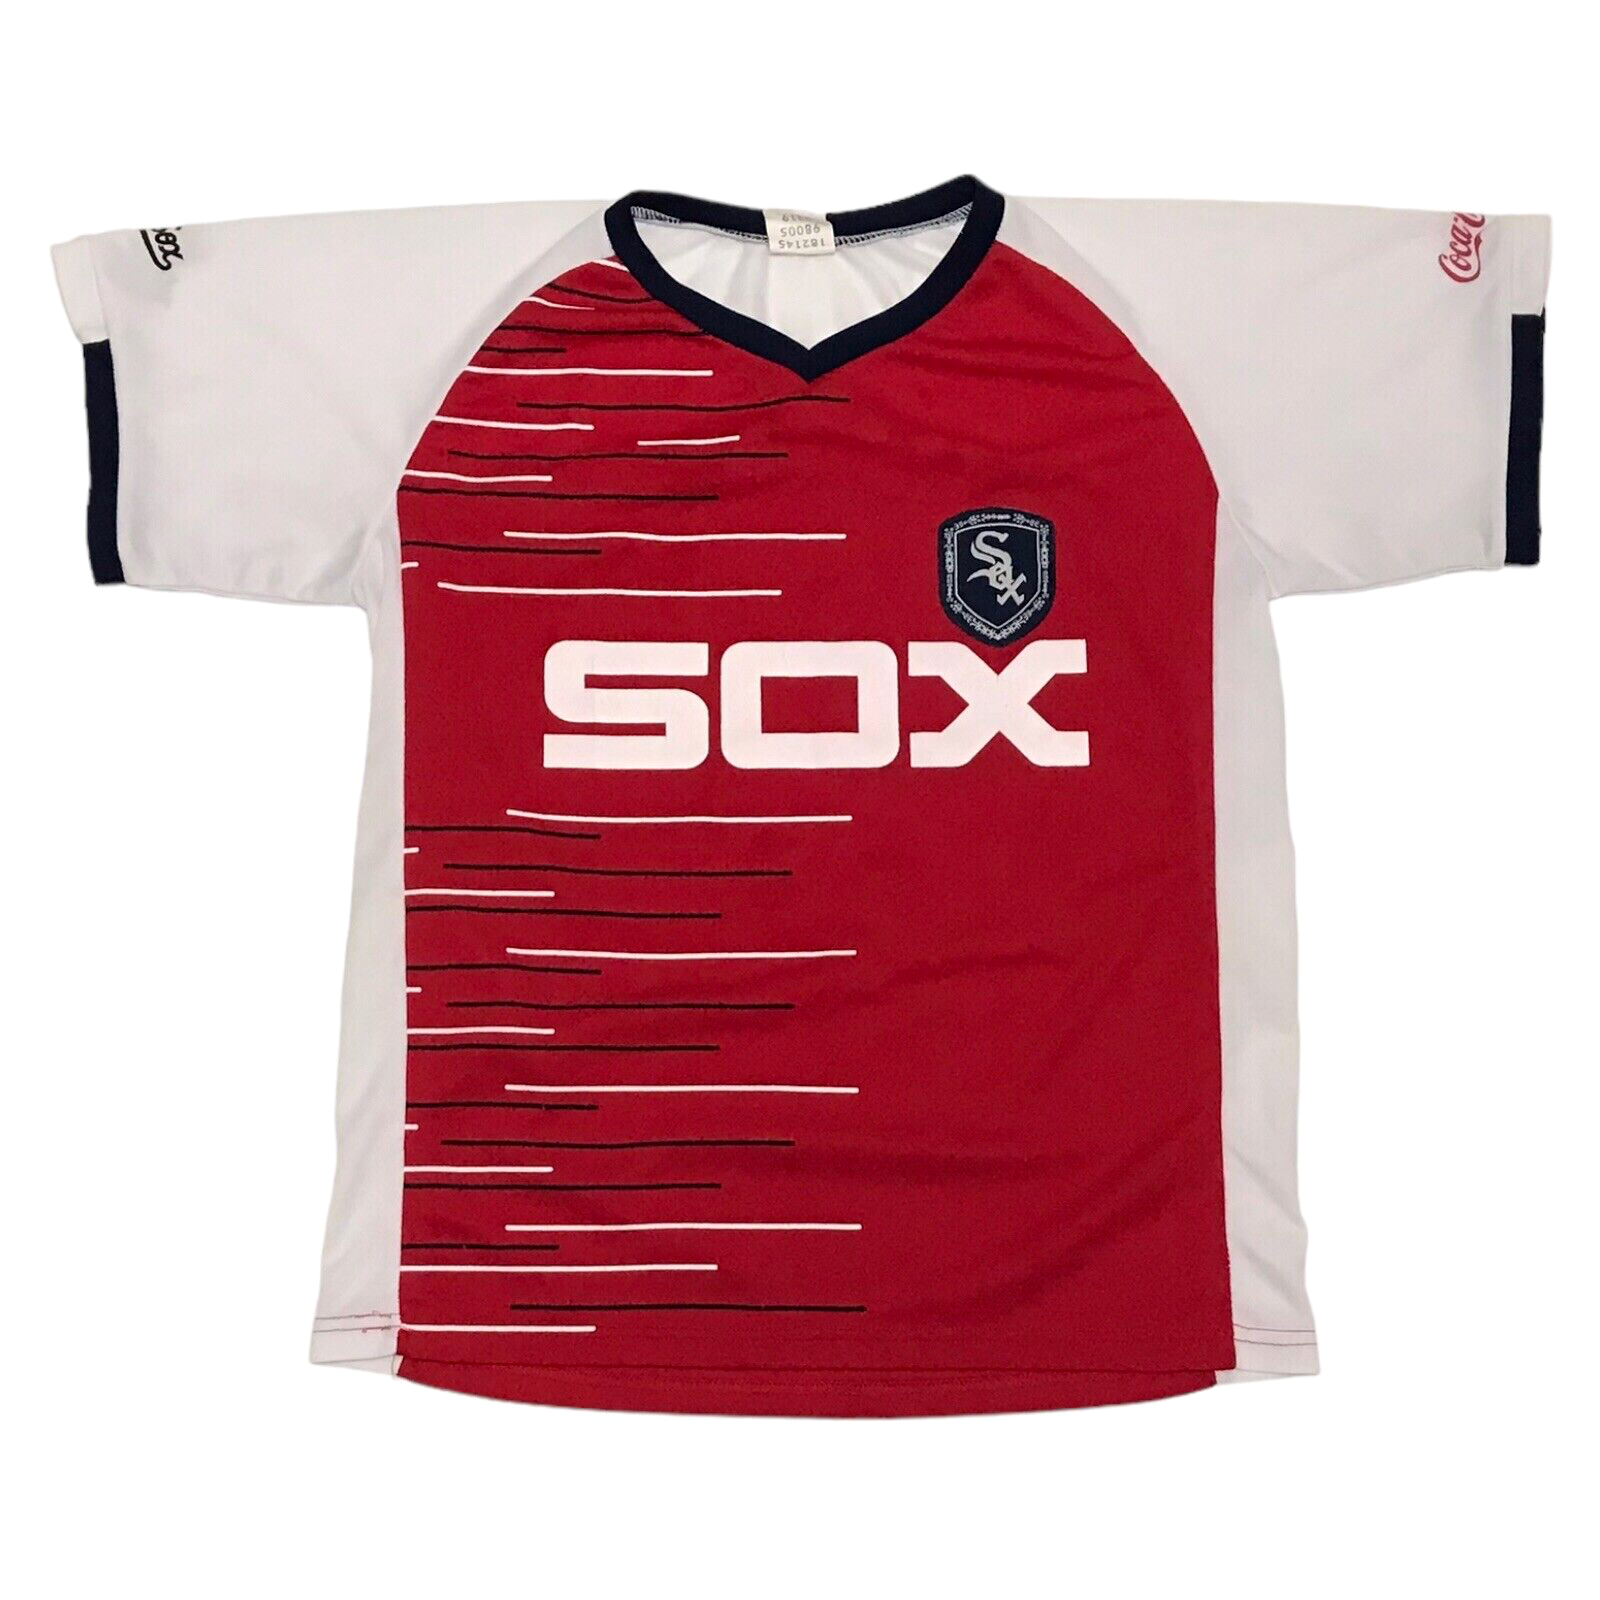 los white sox soccer jersey